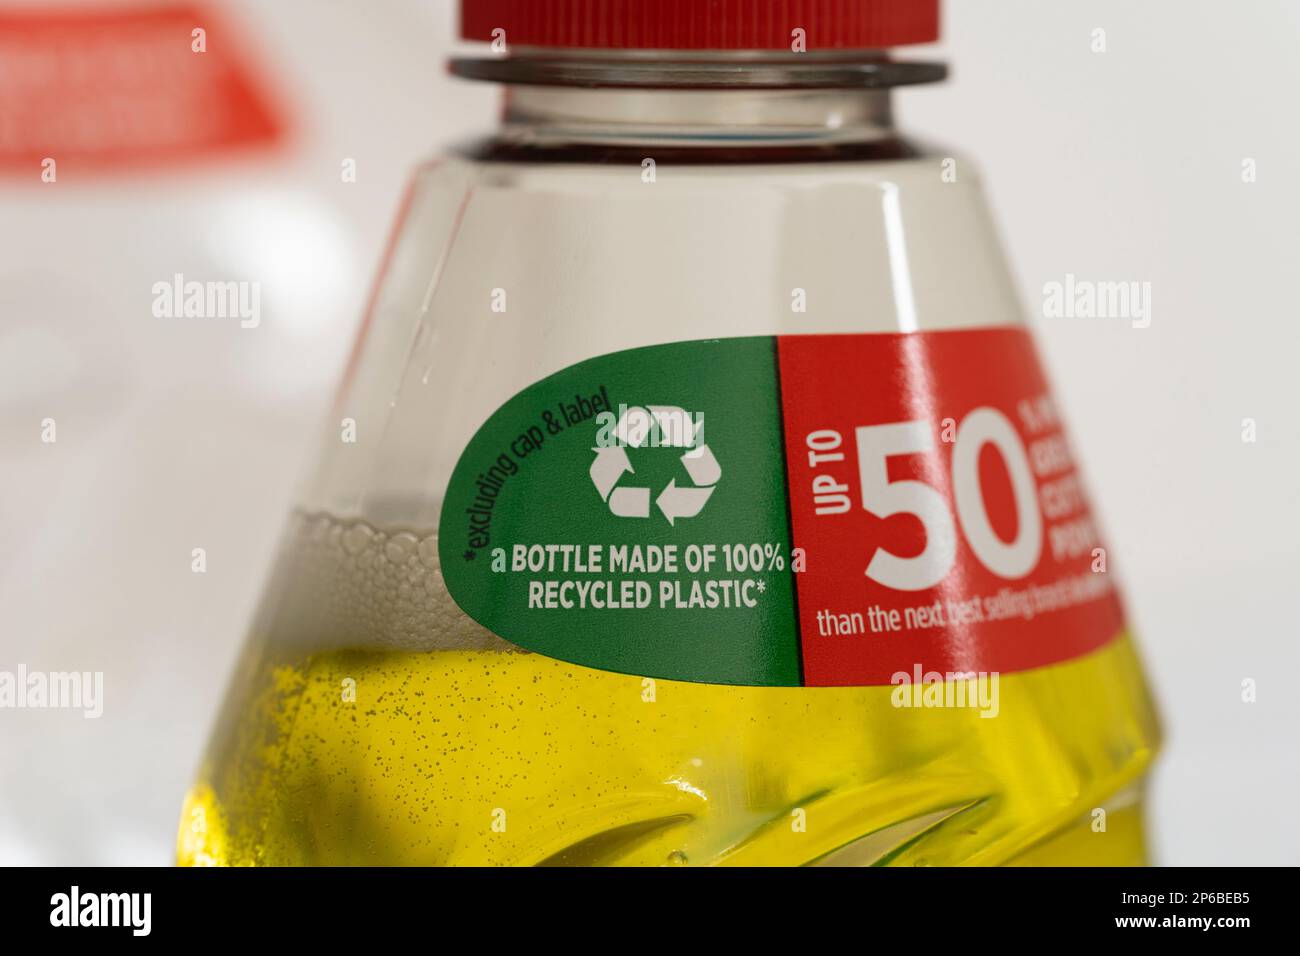 Fairy washing up liquid with a label showing the bottle is manufactured from 100% recycled plastic, advertising Procter & Gamble's green credentials Stock Photo